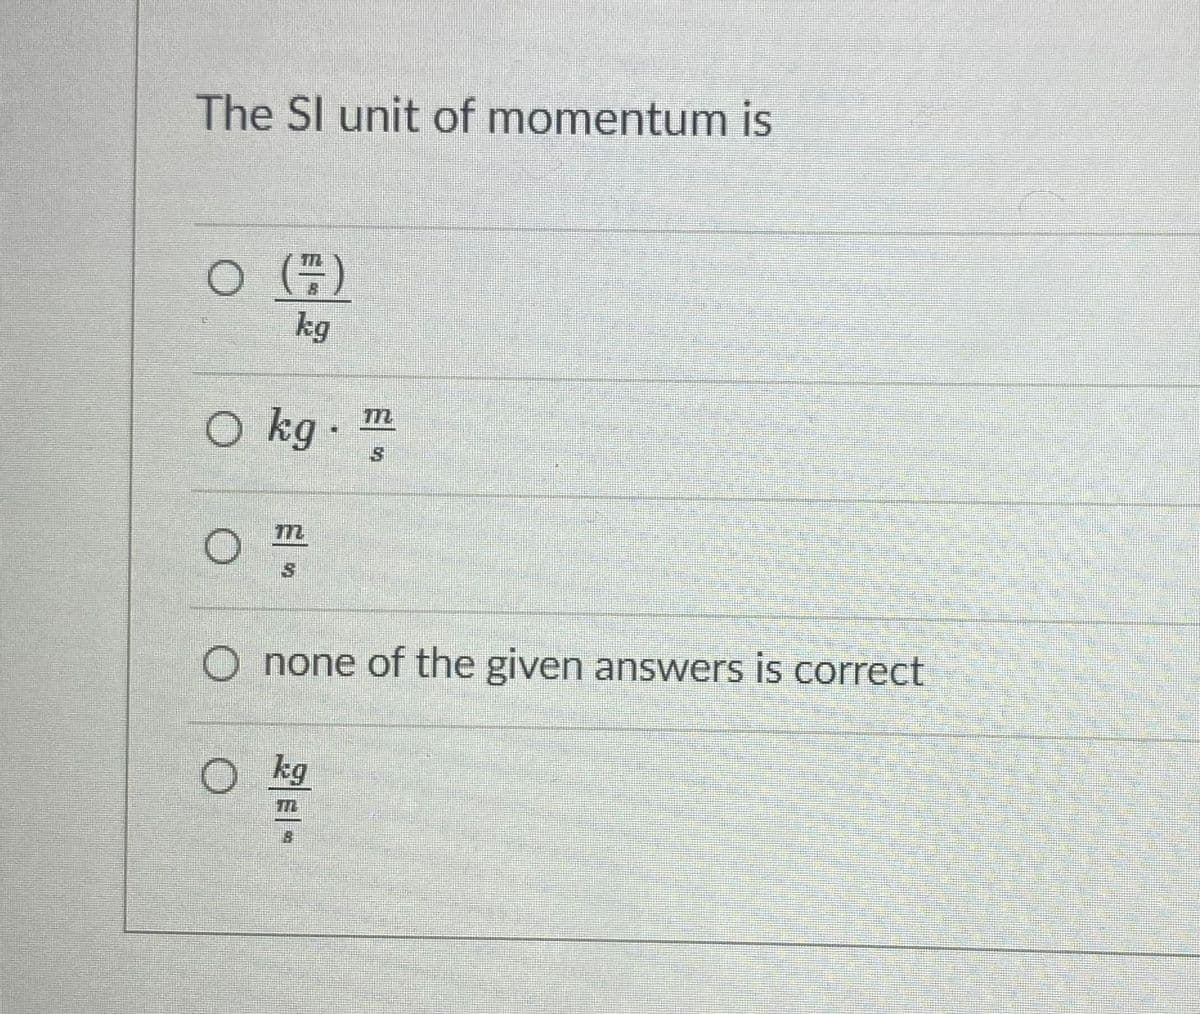 The SI unit of momentum is
kg
O kg ·
m
O none of the given answers is correct
O kg
